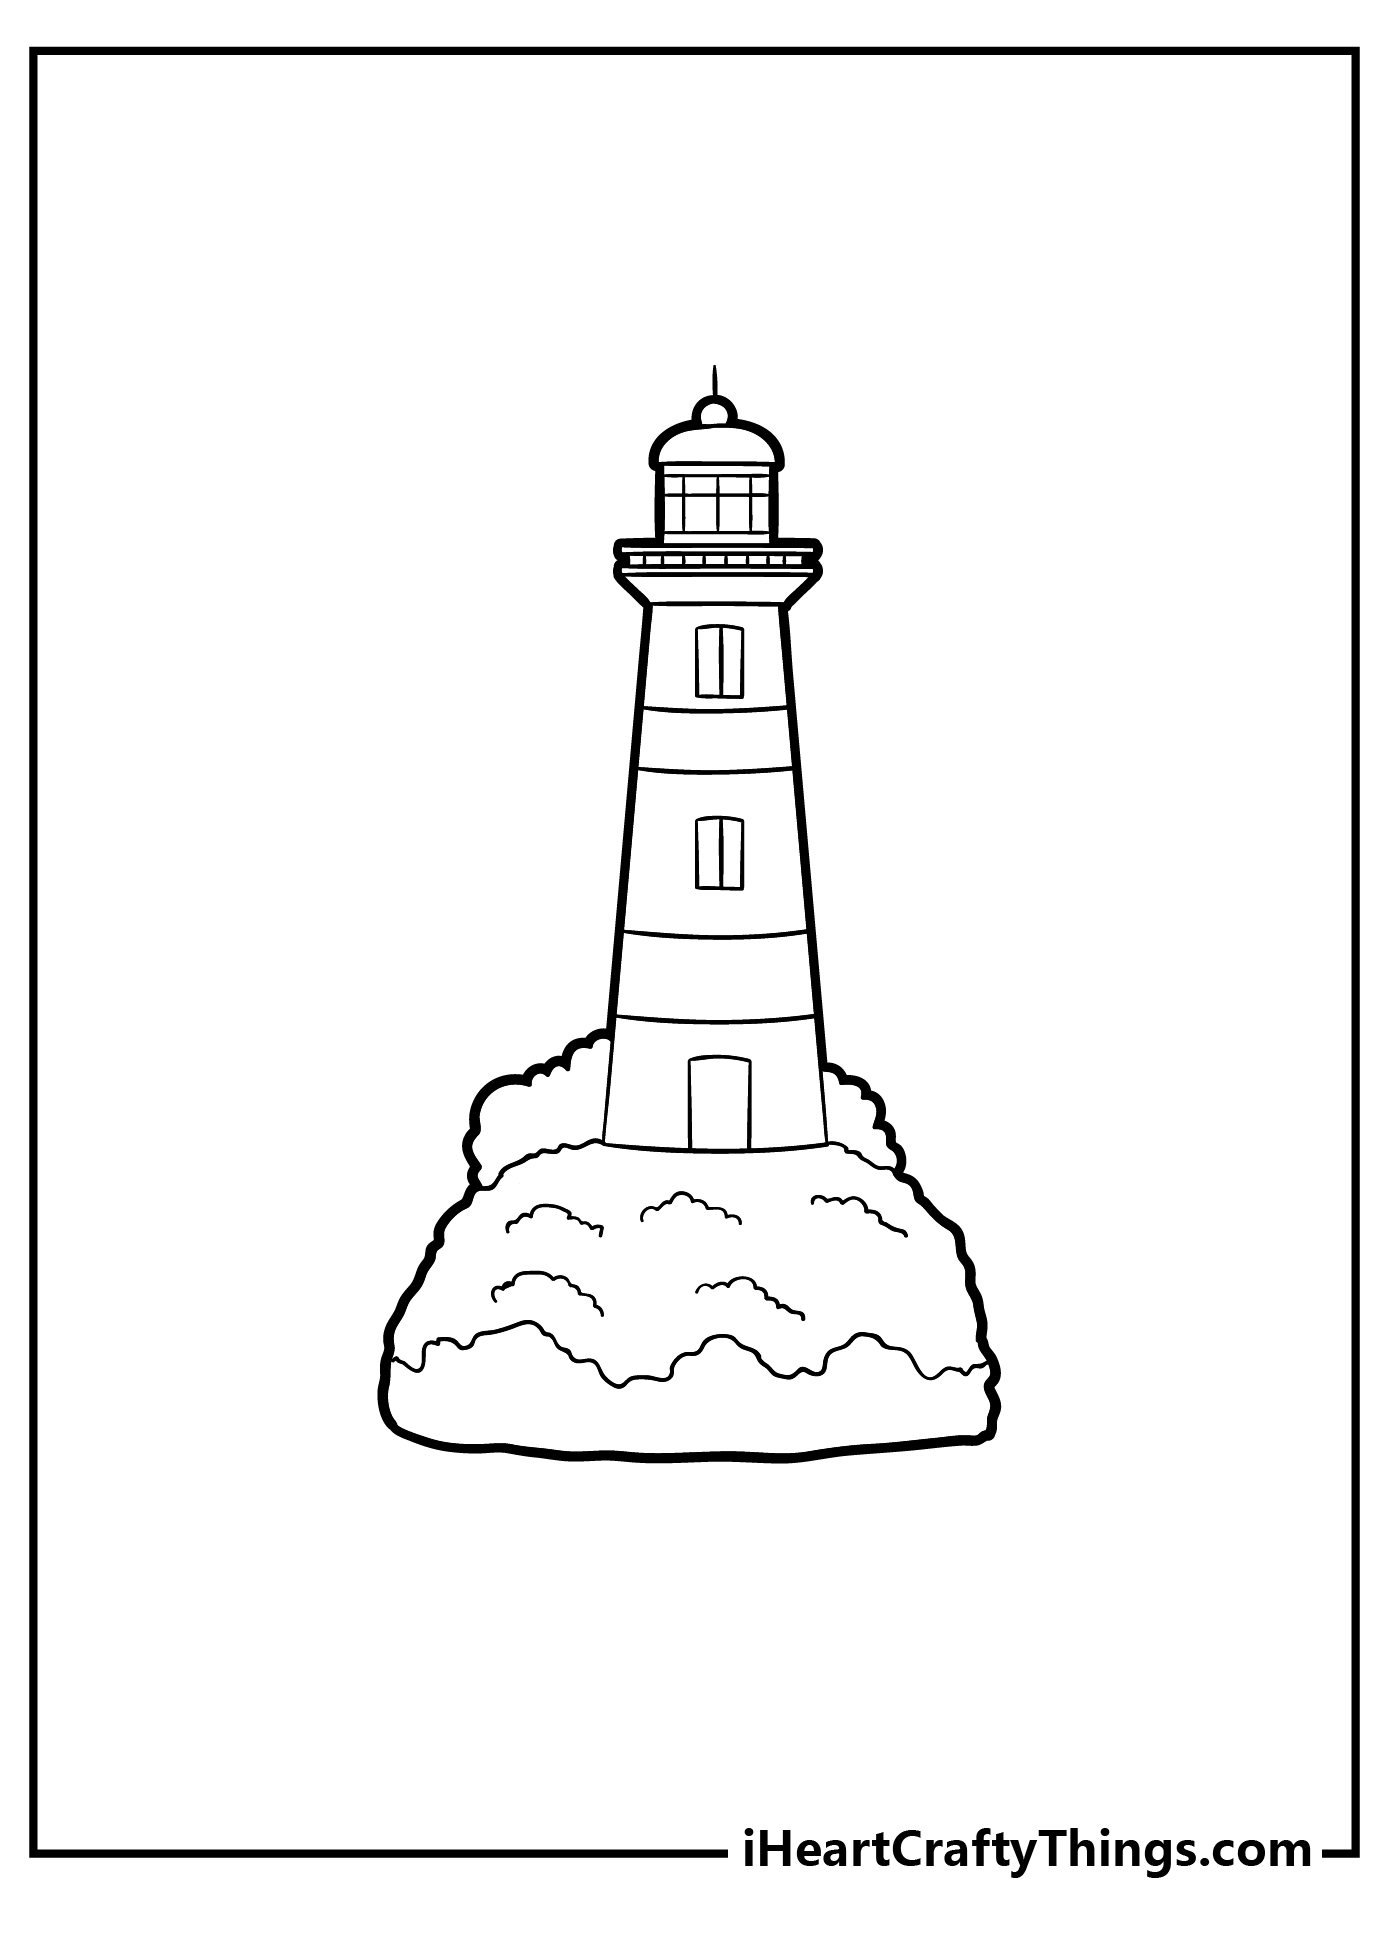 Lighthouse Coloring Pages for preschoolers free printable